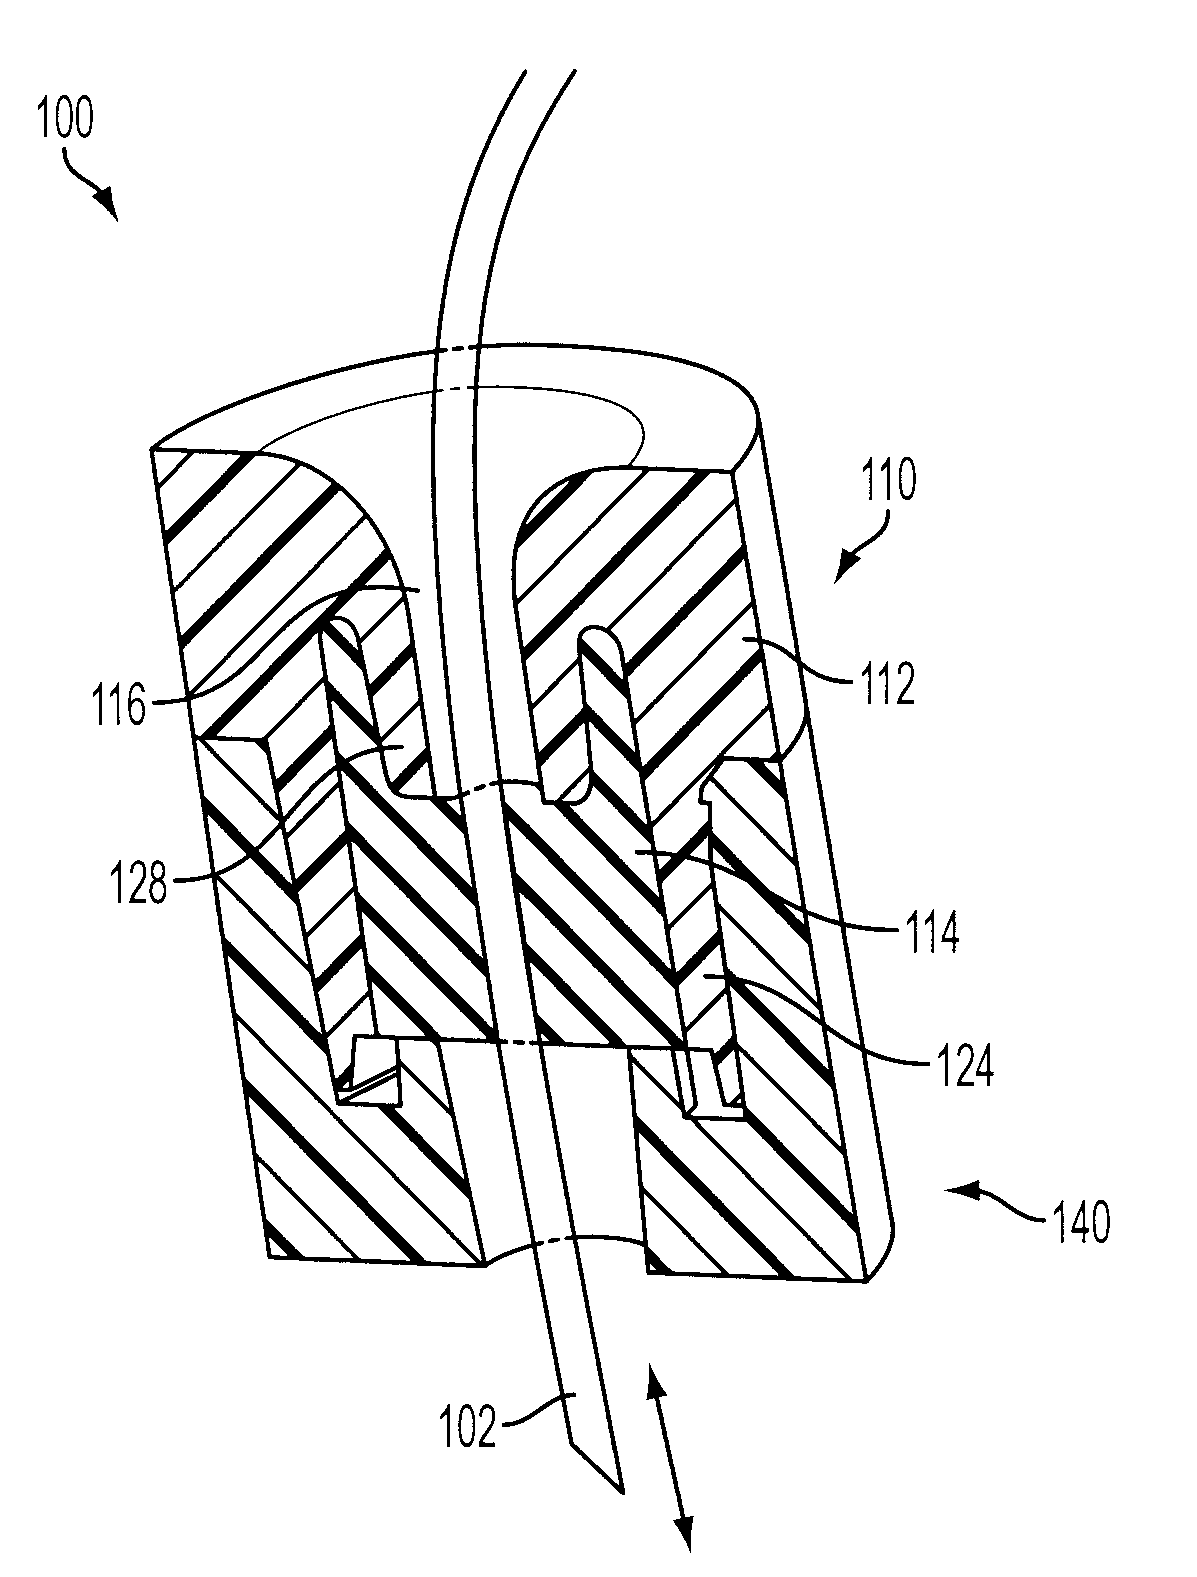 Environmental seal for fluid delivery device